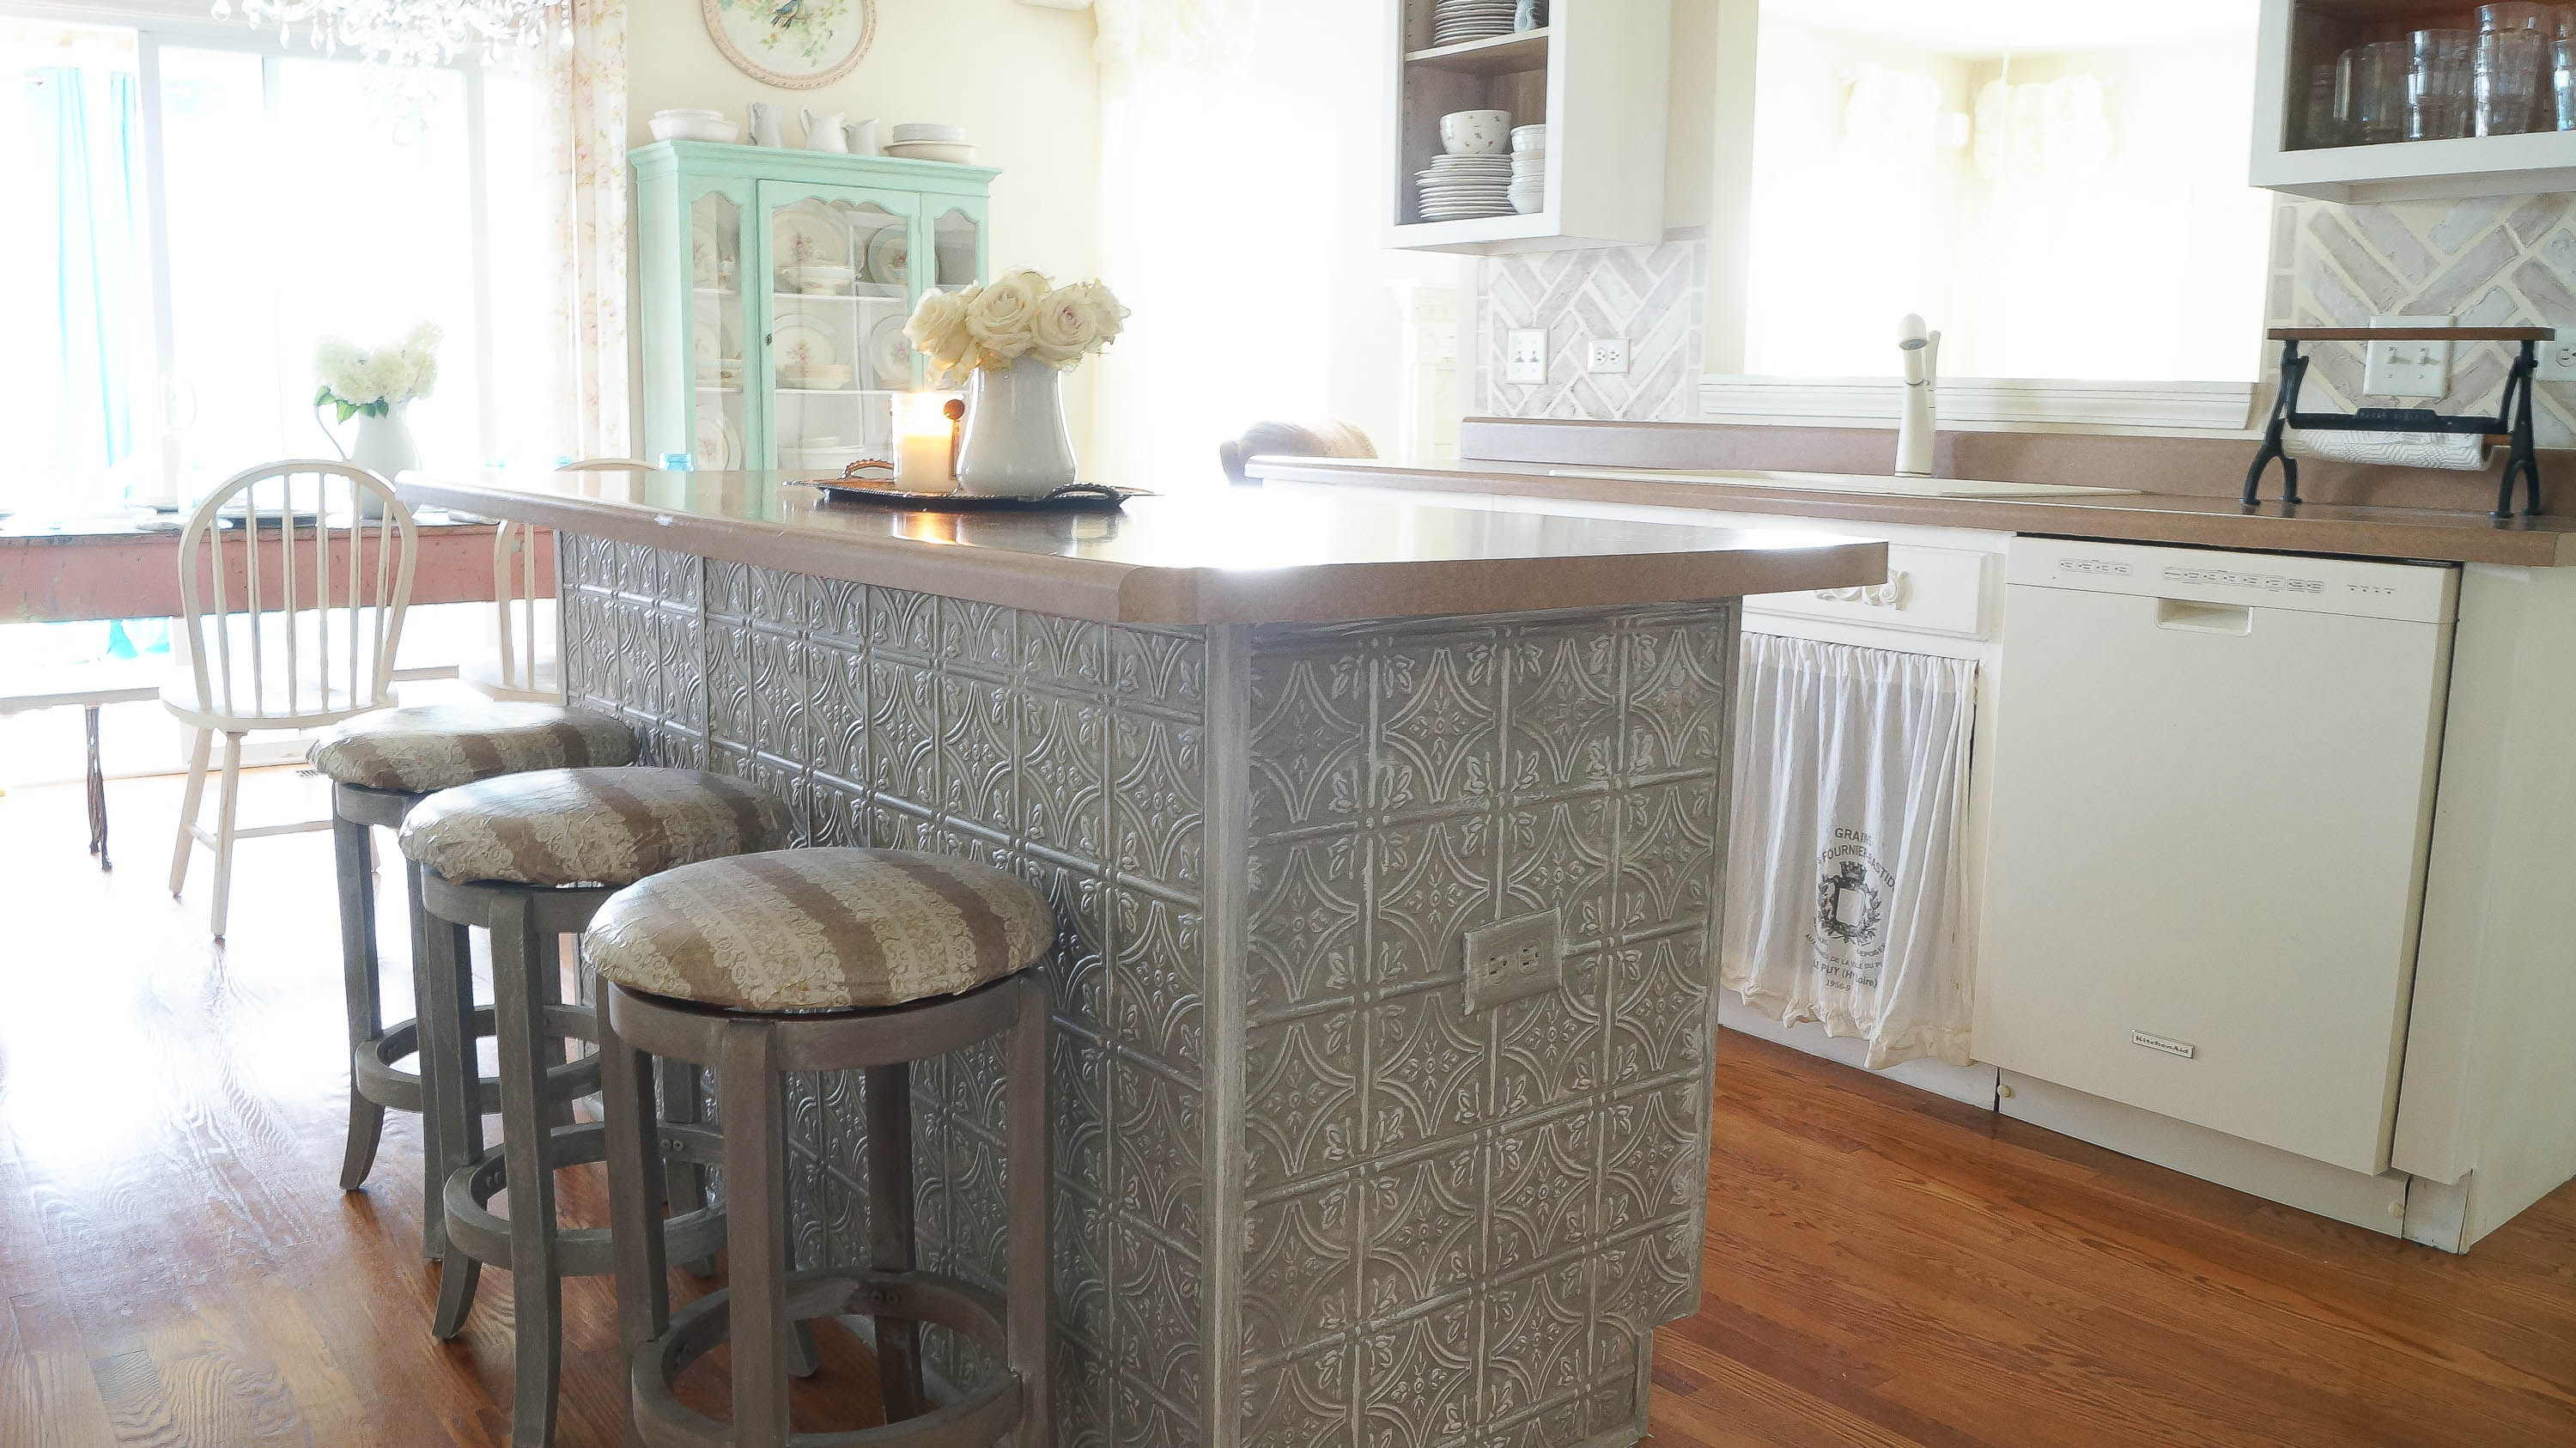 Faux Tin Ceiling Tiles Kitchen Island - Kitchen Island With Tiles - HD Wallpaper 